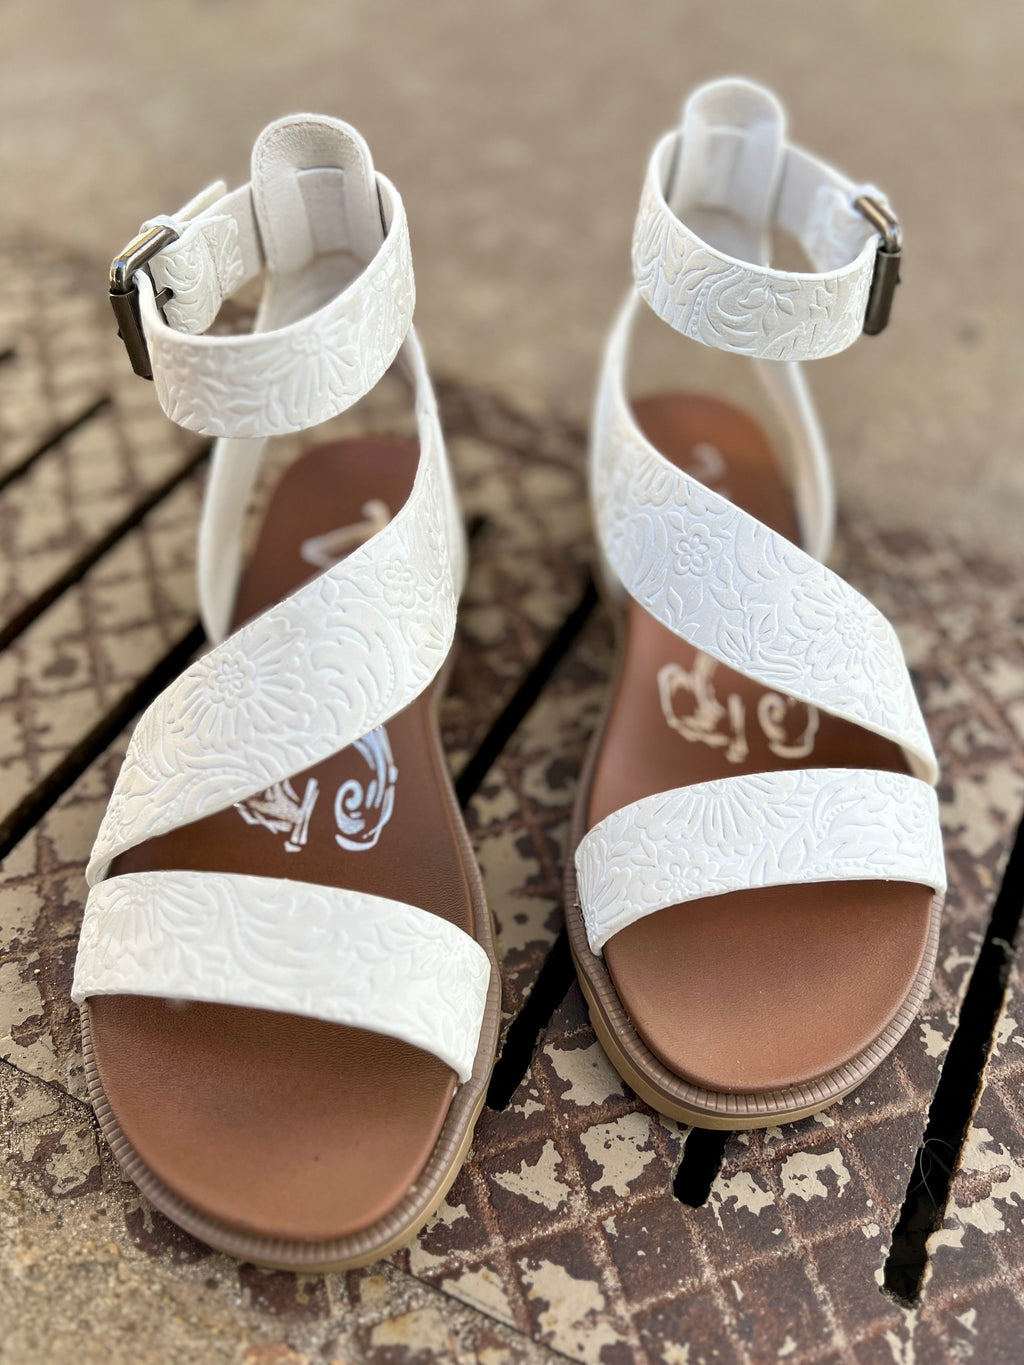 white platform wedge sandal. Sandals with floral straps. Comfortable sandals. Very G sandals. Cute sandals. white sandals. Boutique. Small business. Woman owned.